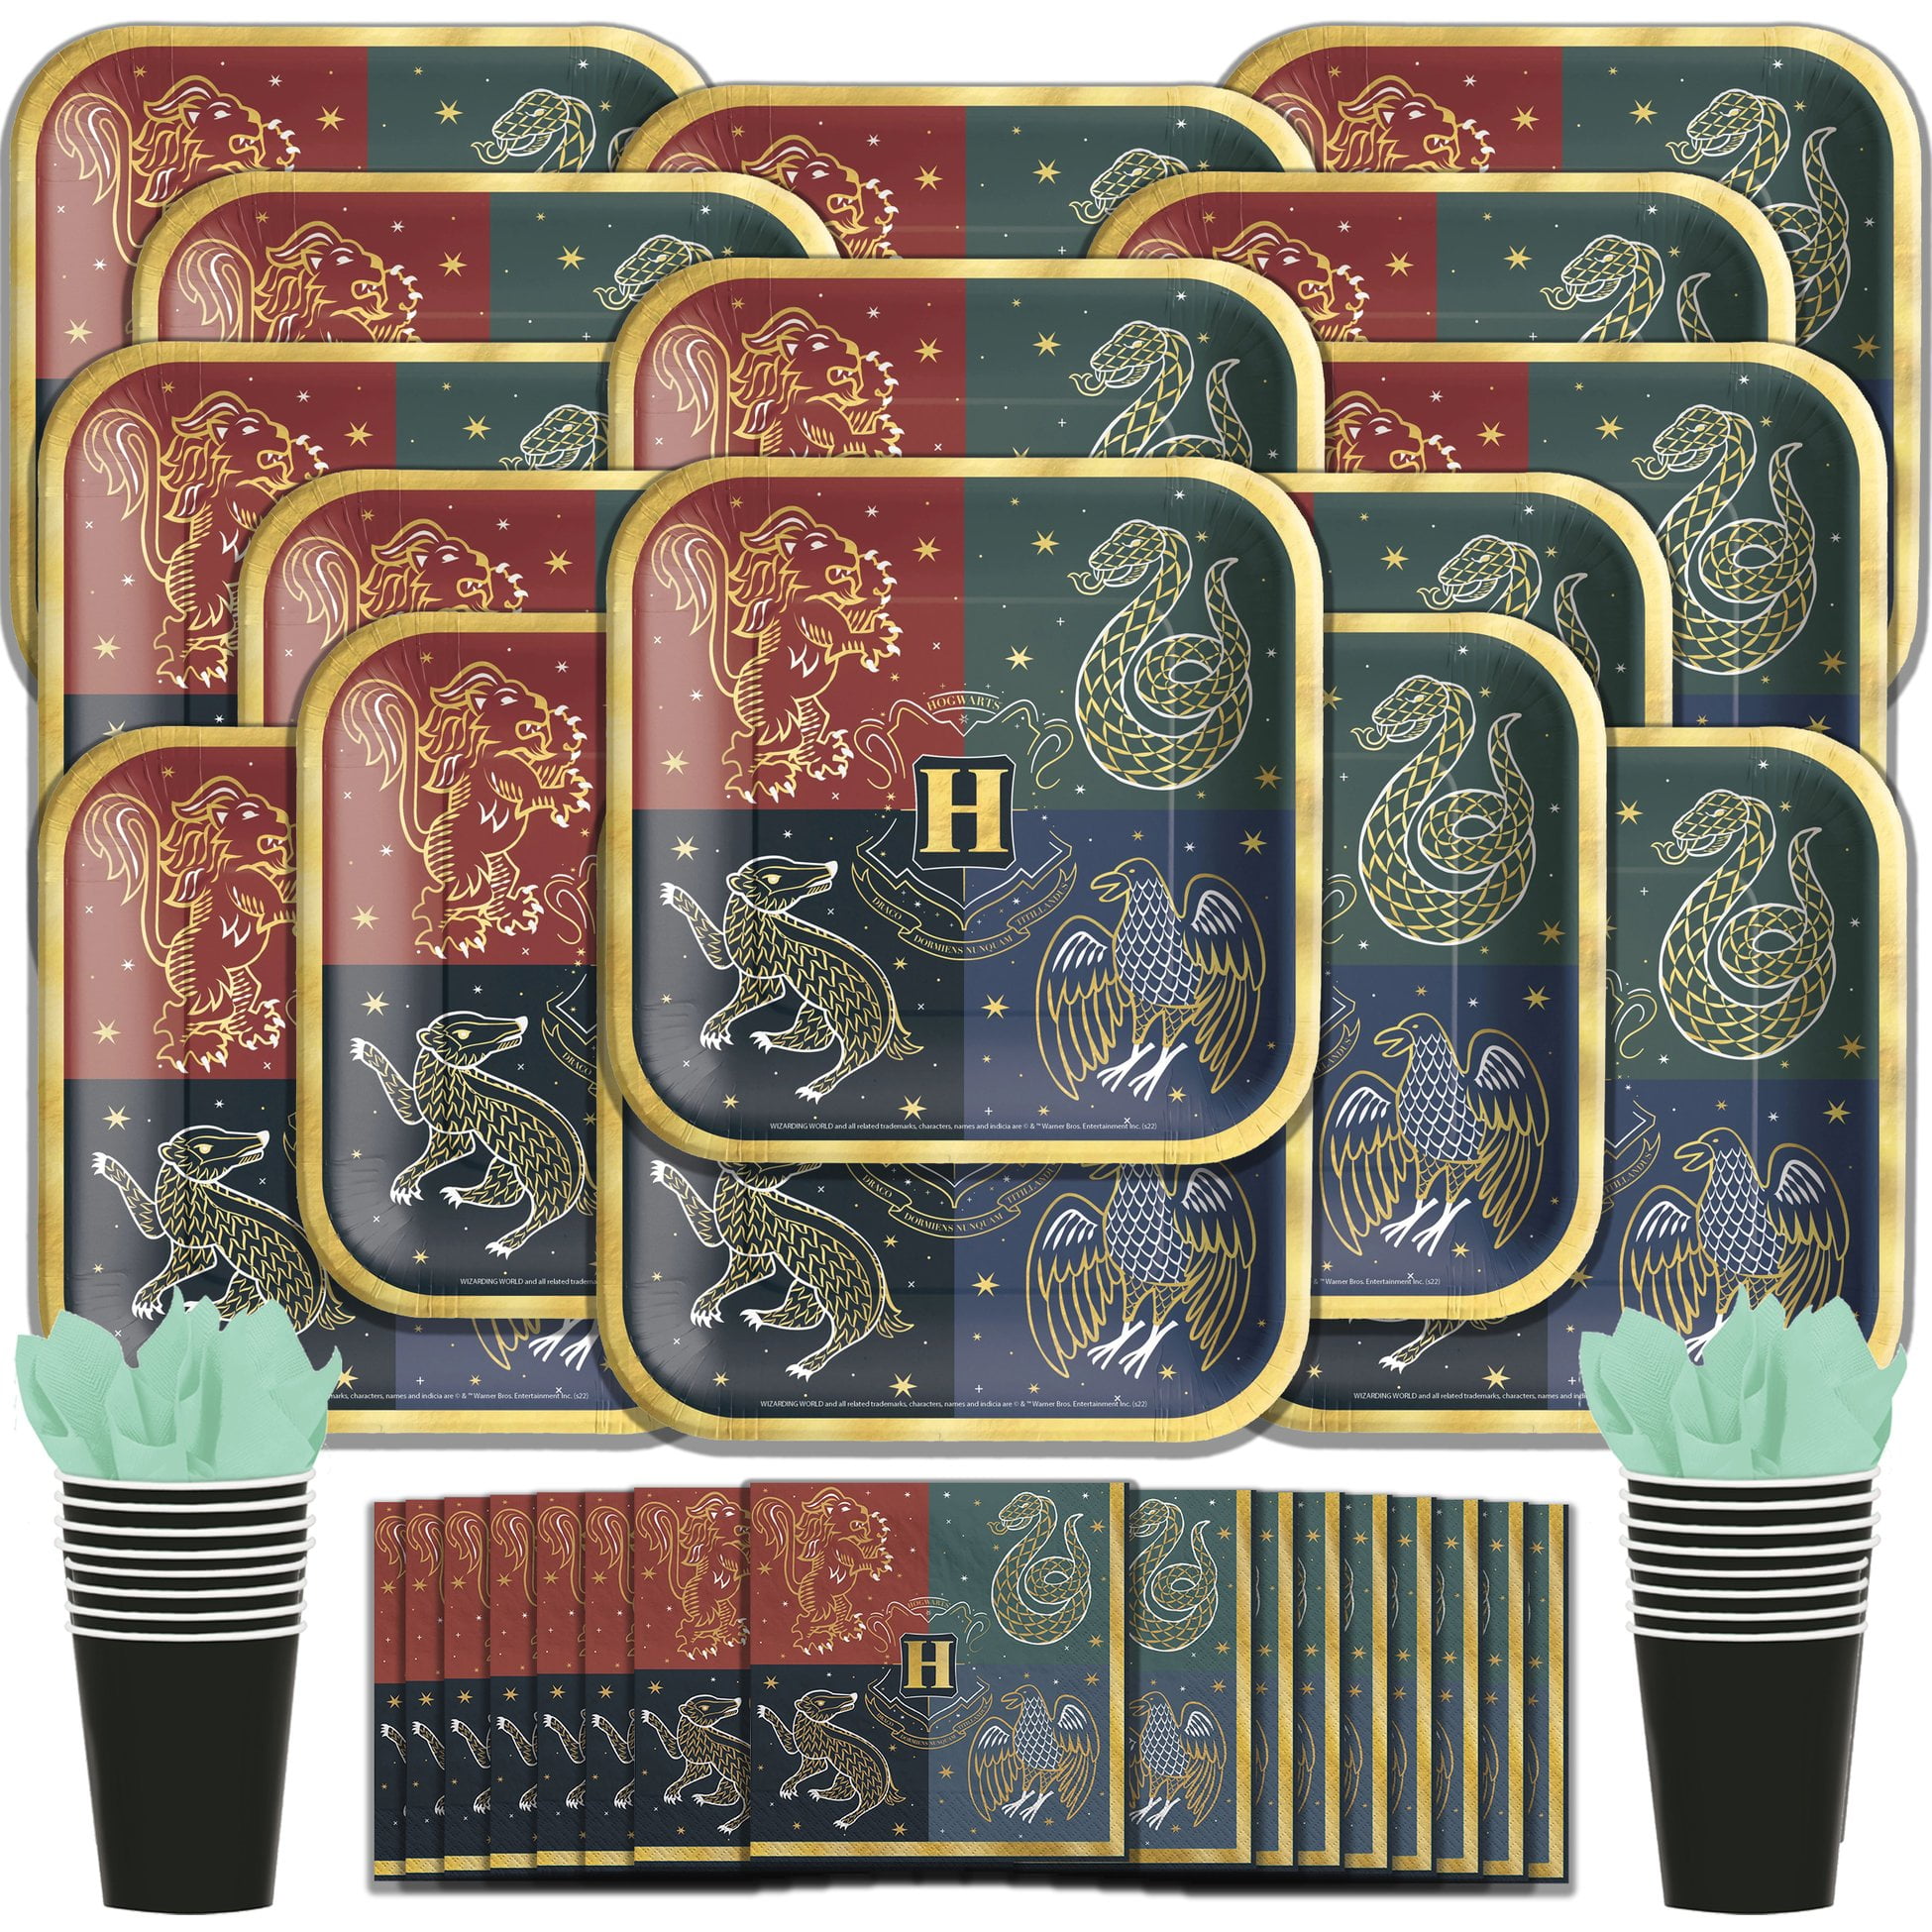 HARRY POTTER Birthday Party Kit for 8 guests Plates Napkins Cups Tablecloth  +